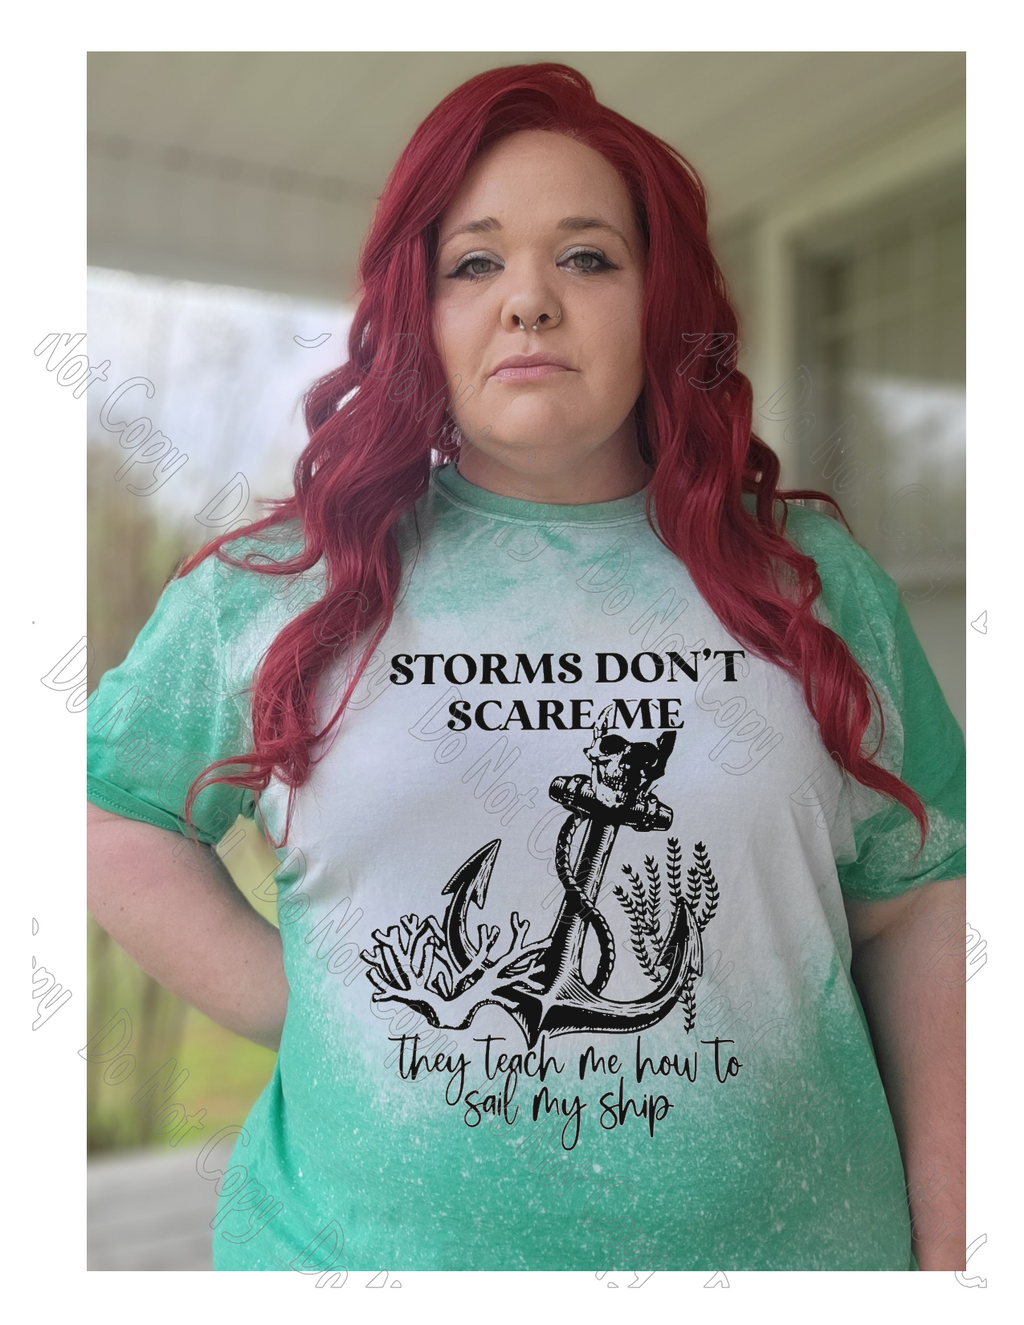 STORMS DON'T SCARE ME TEE